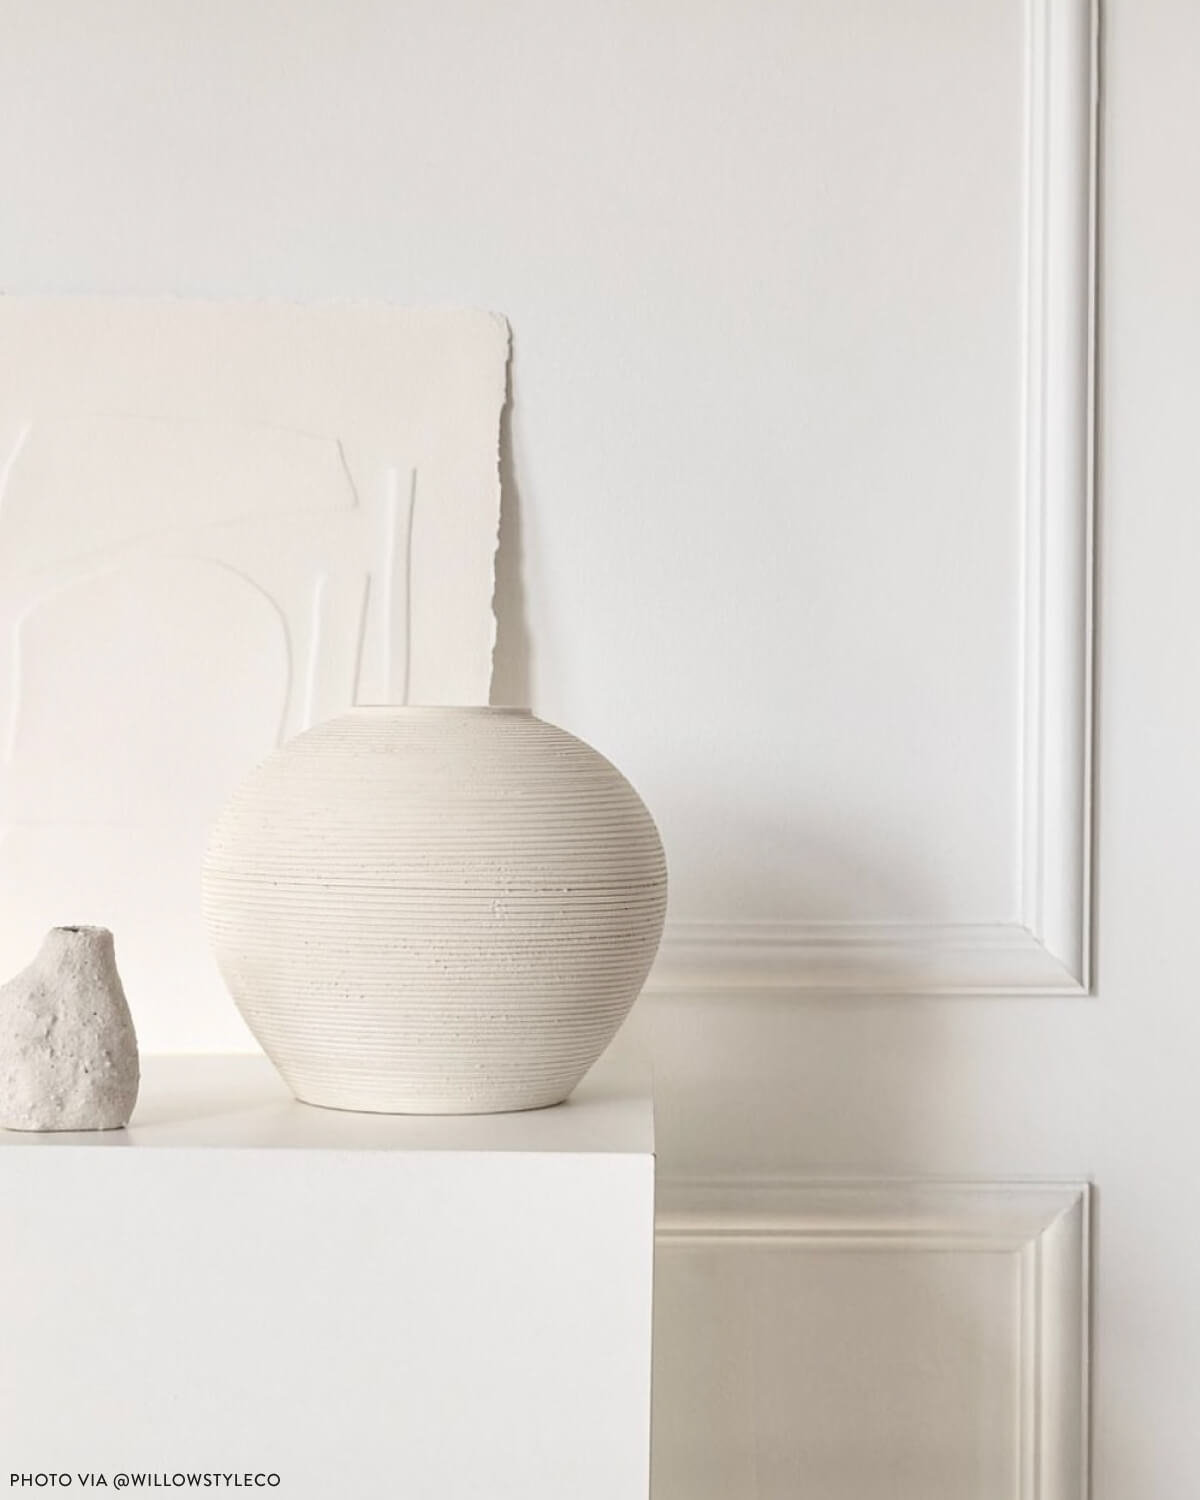 
                  
                    Round textured Zarina vase by Fairkind styled on pedestal in modern living room. Photo via @willowstyleco
                  
                